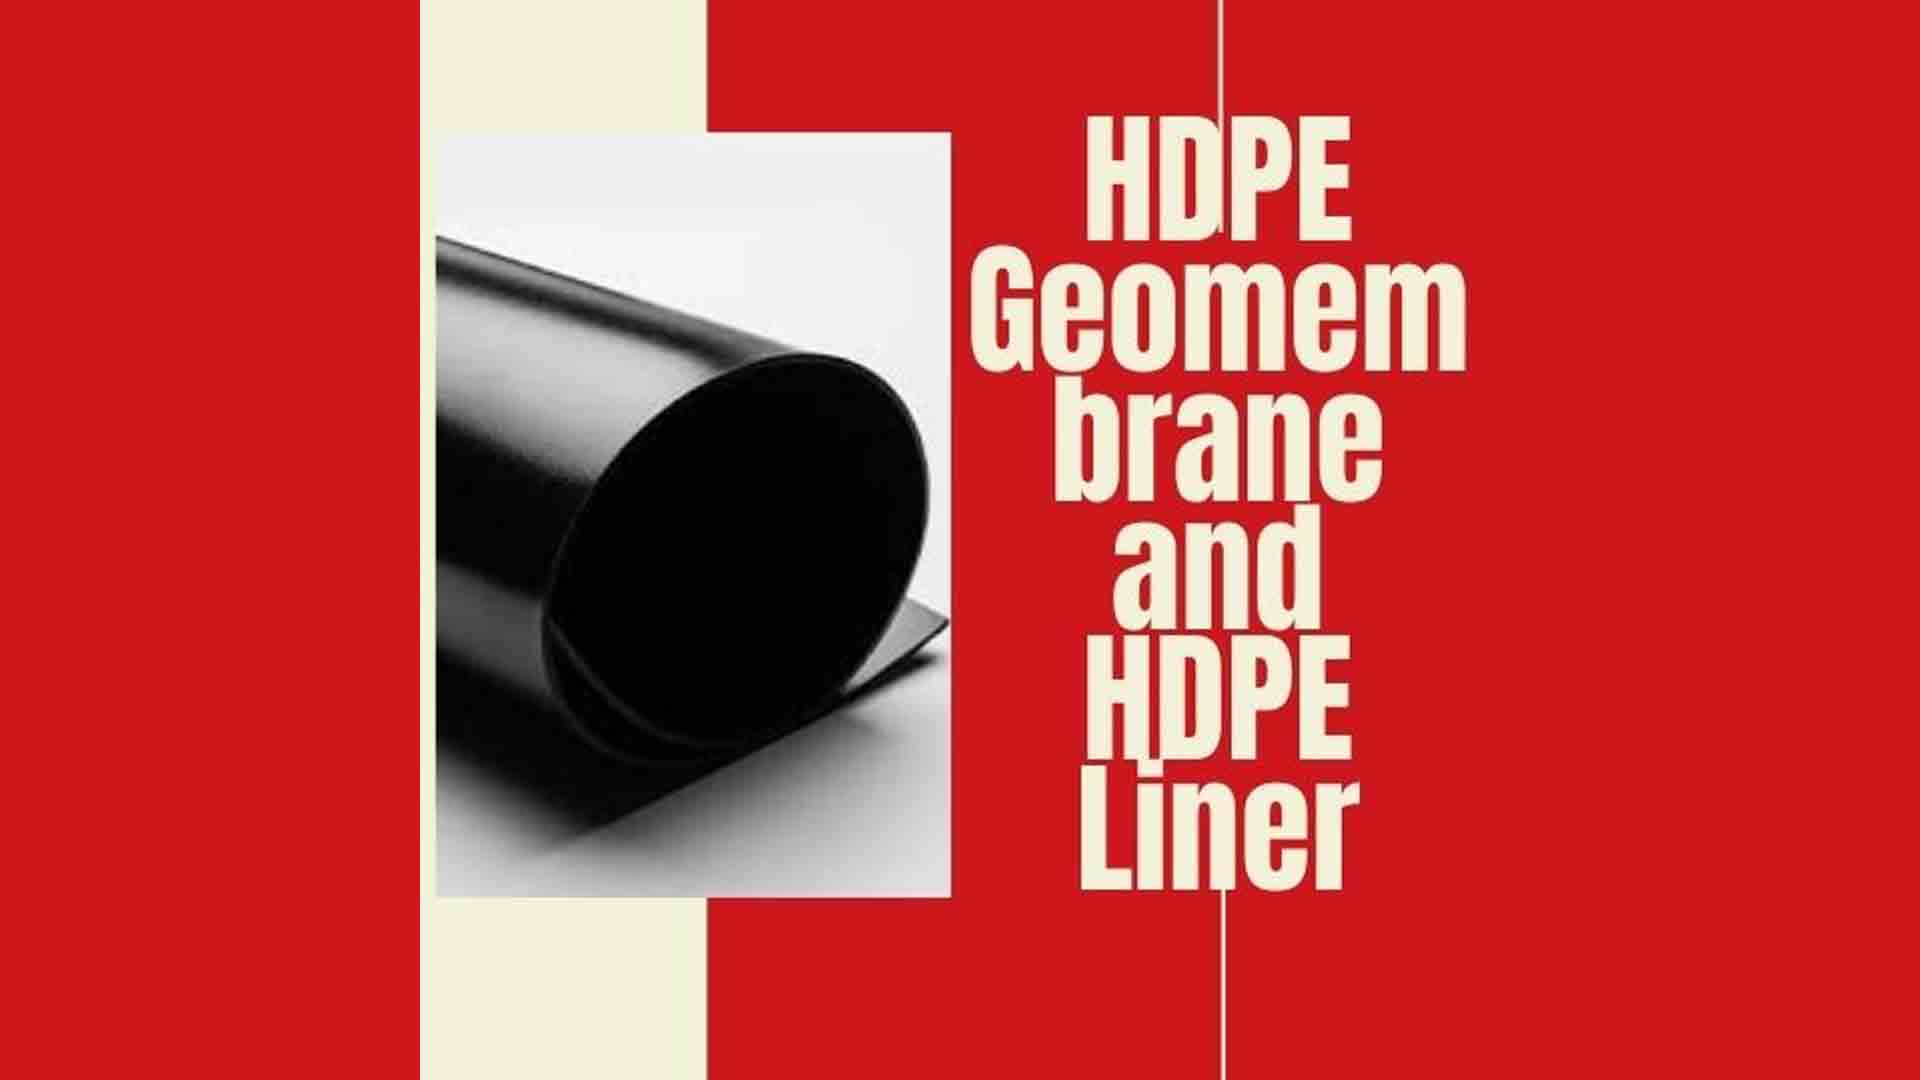 HDPE Geomembrane and HDPE Liner